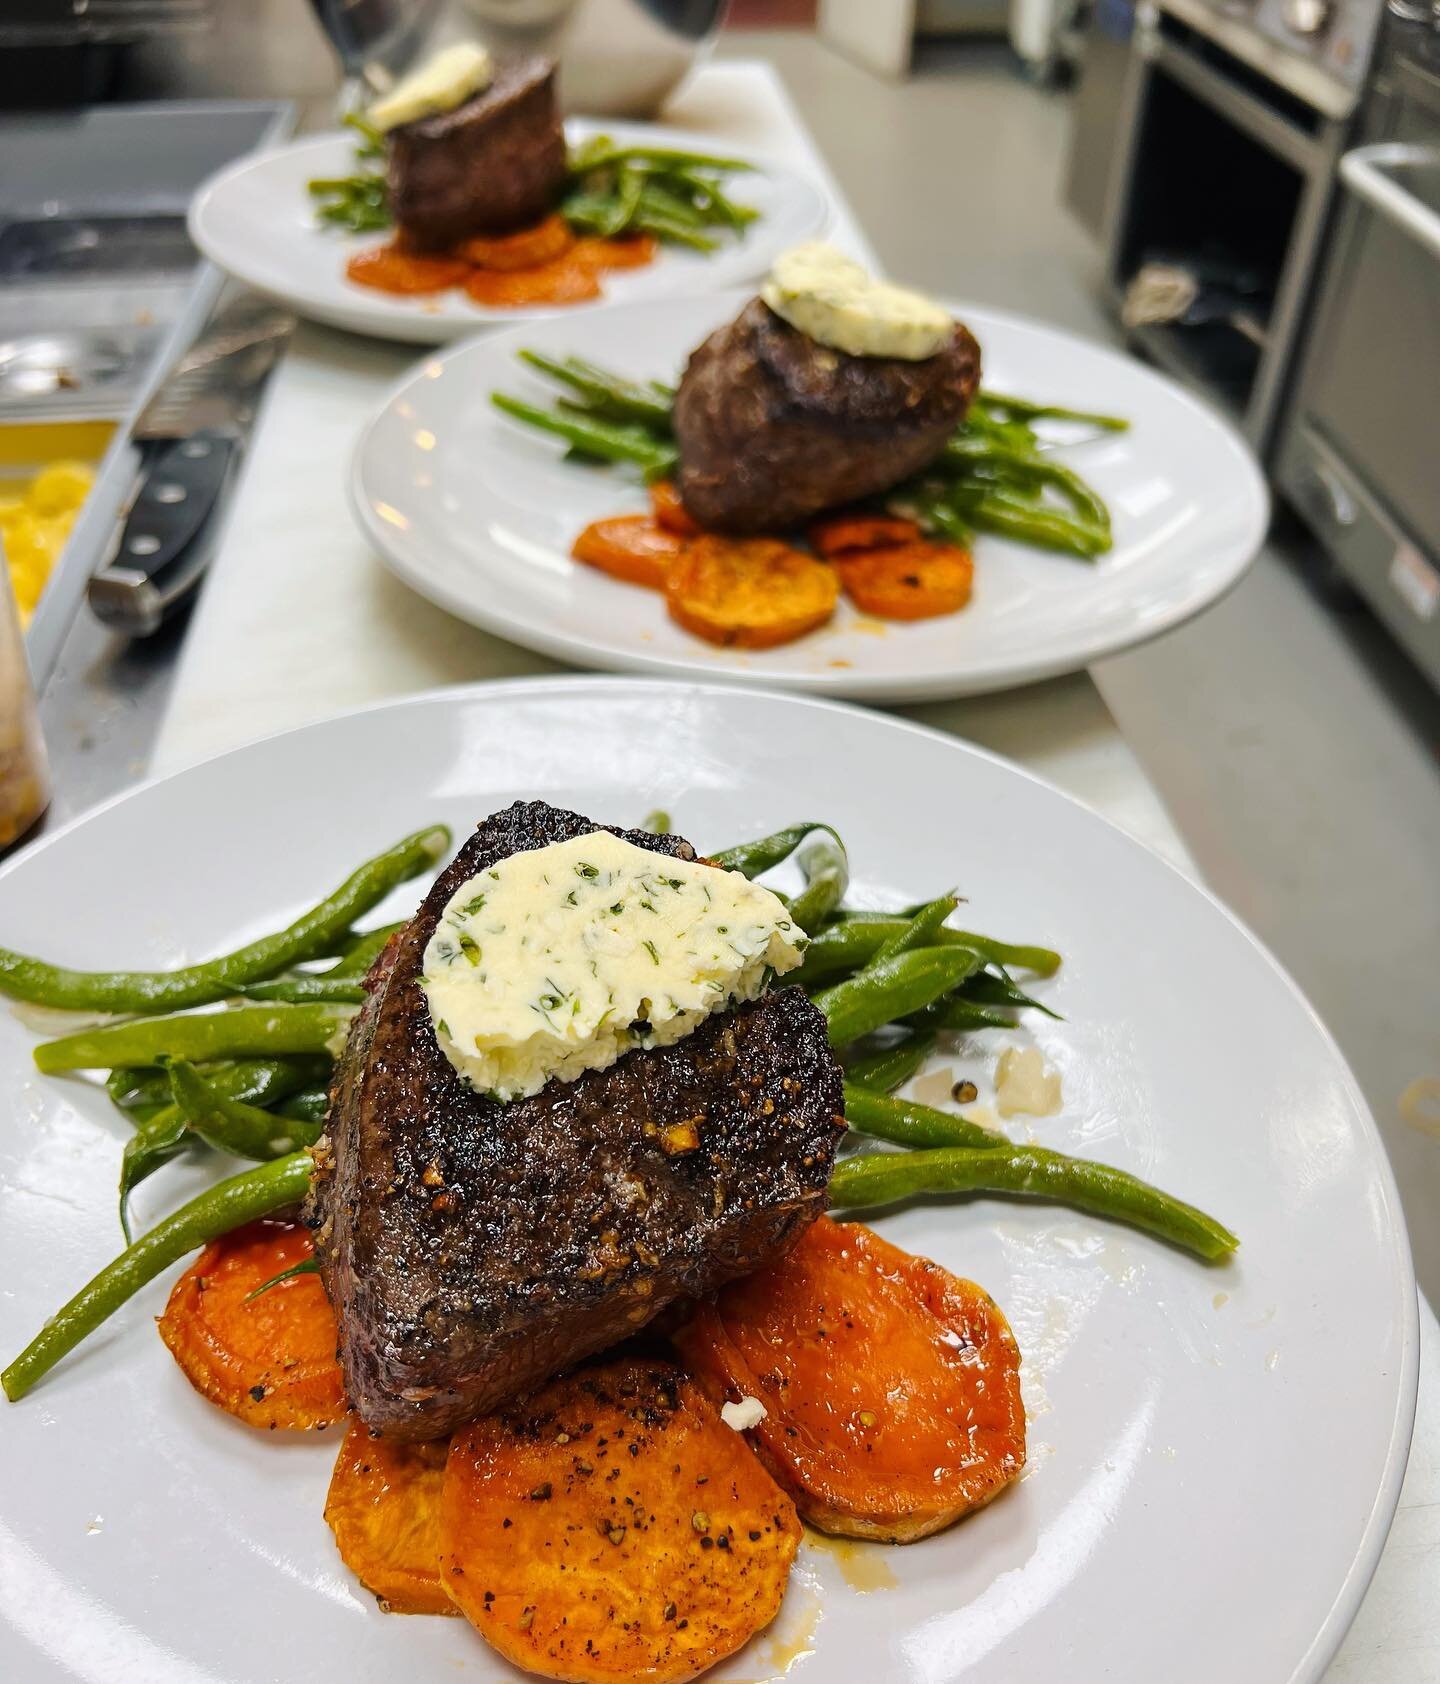 Seared baseball sirloin served with lemon sorghum glaze sweet potato, snap beens with caramelized shallots, and topped Gorgonzola herb butter